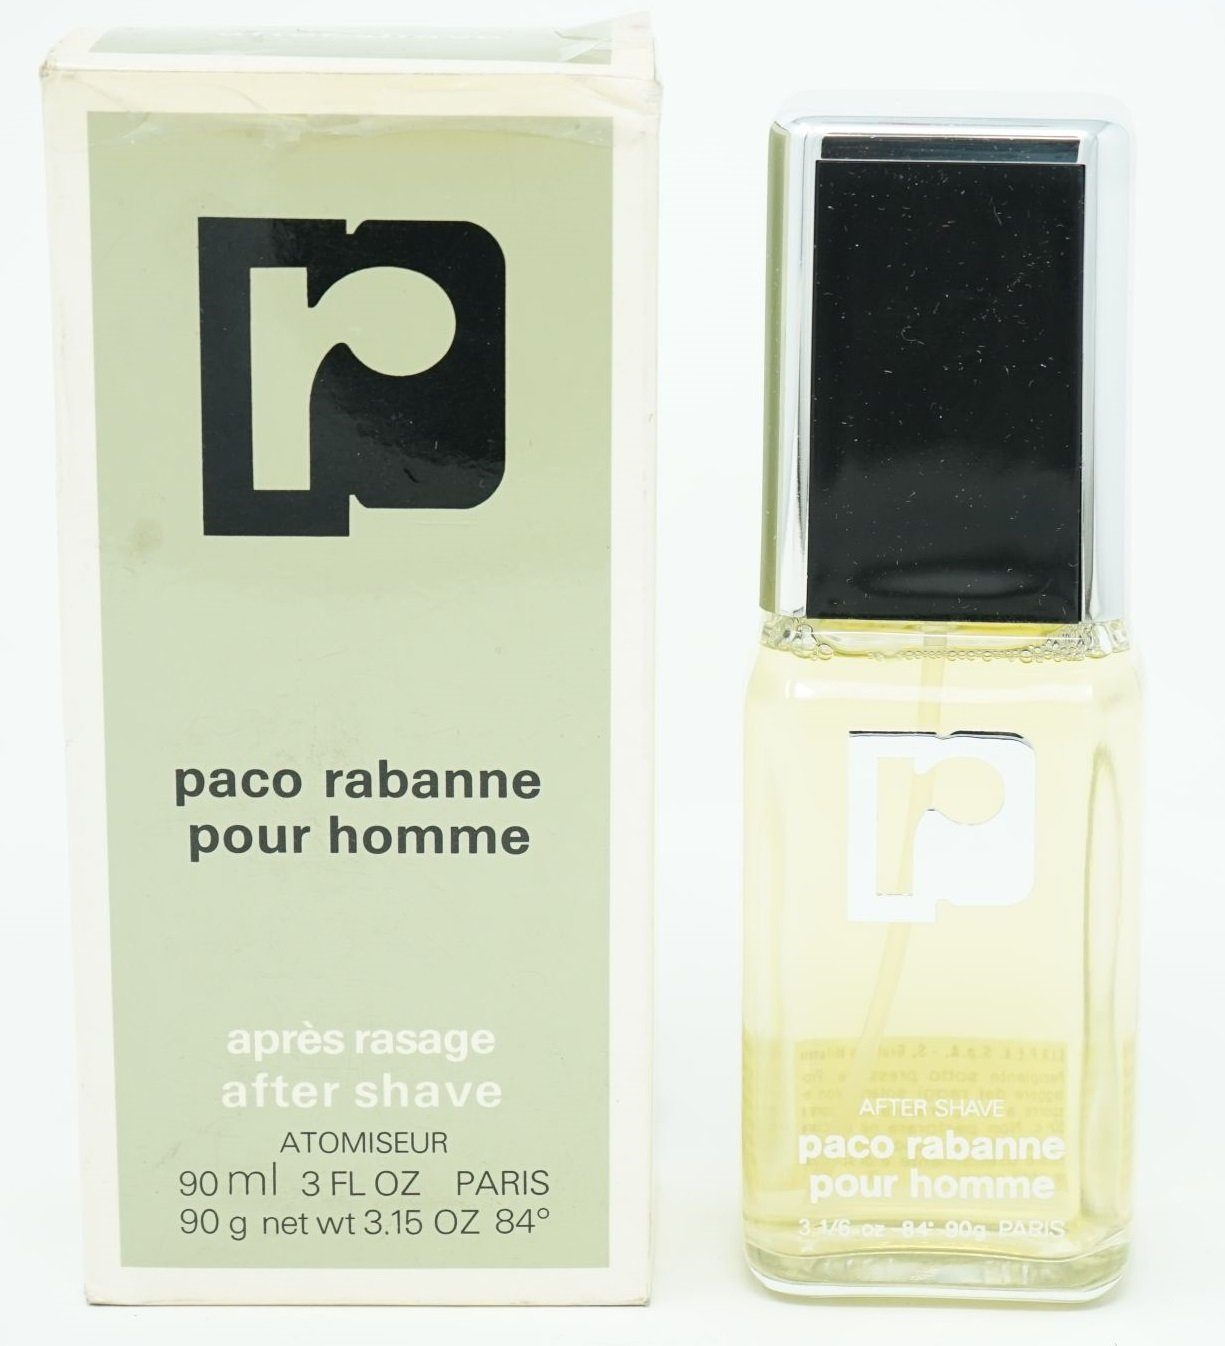 paco rabanne After-Shave Rabanne Shave Pour Atomiseur ml After 90 Paco Homme